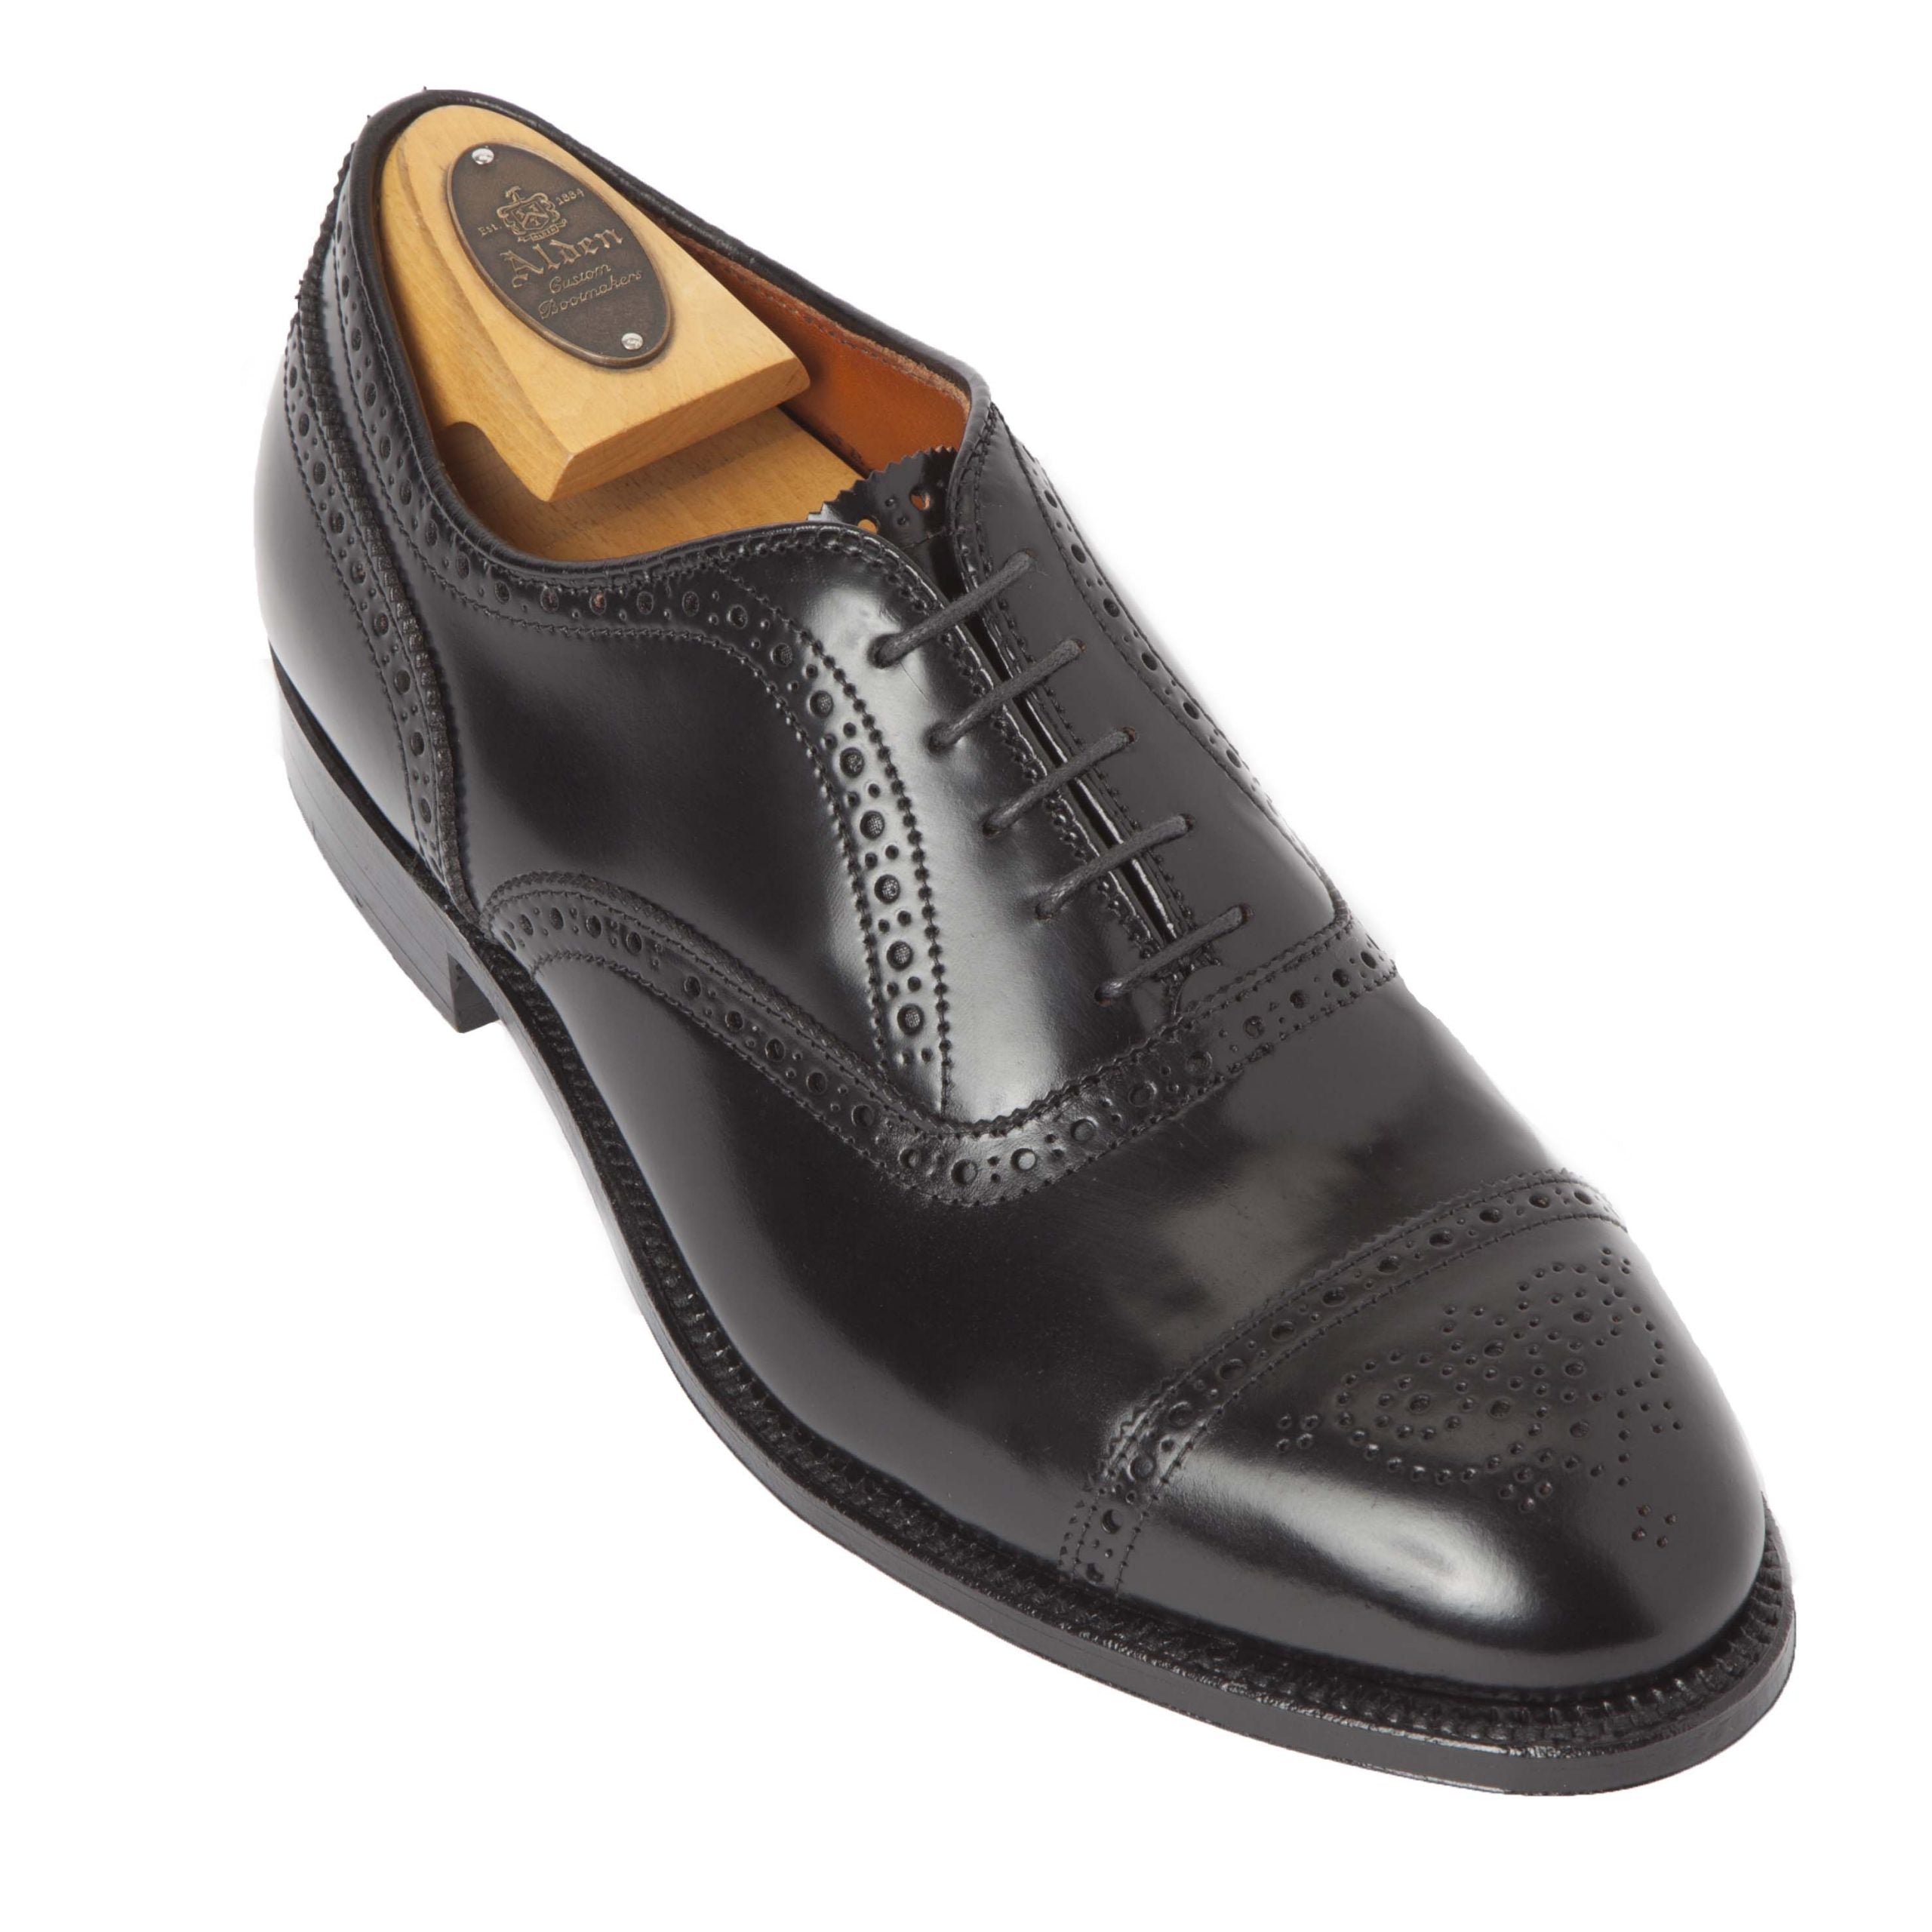 9071 - Straight Tip Bal in Black Shell Cordovan